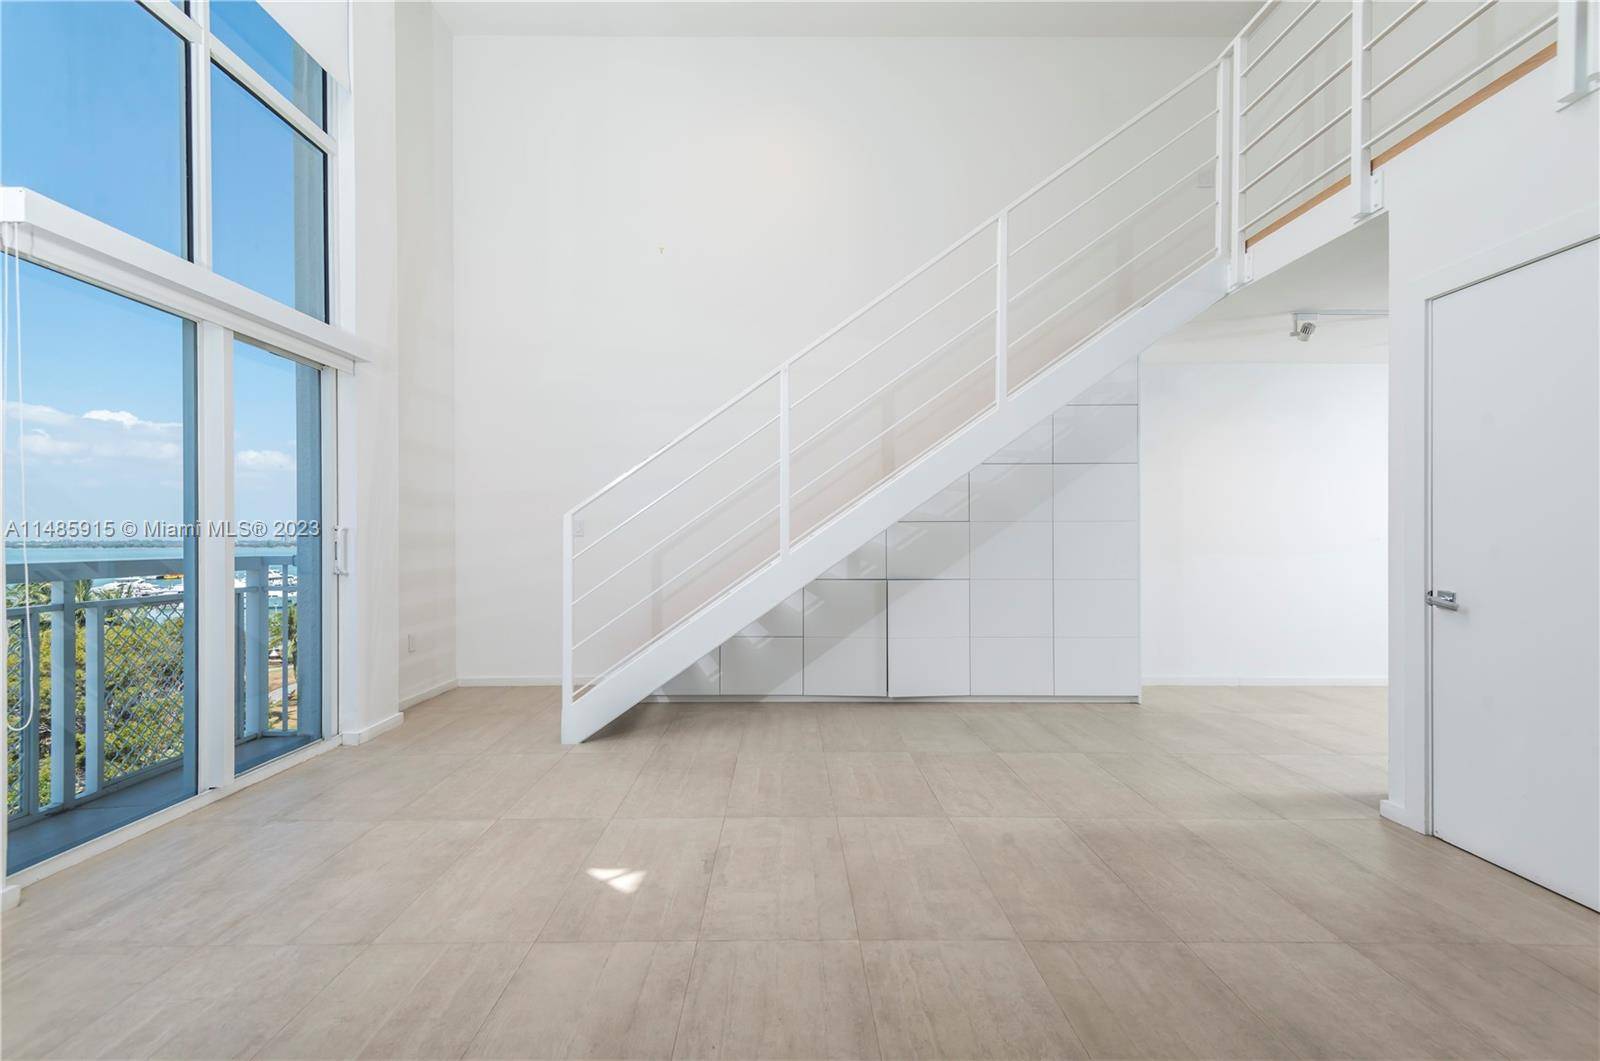 Located in the highly desirable Sunset Harbour neighborhood of Miami Beach, this rarely available 2 story Penthouse offers 3 bedrooms, 3 baths and 2, 613 sq ft of living space.